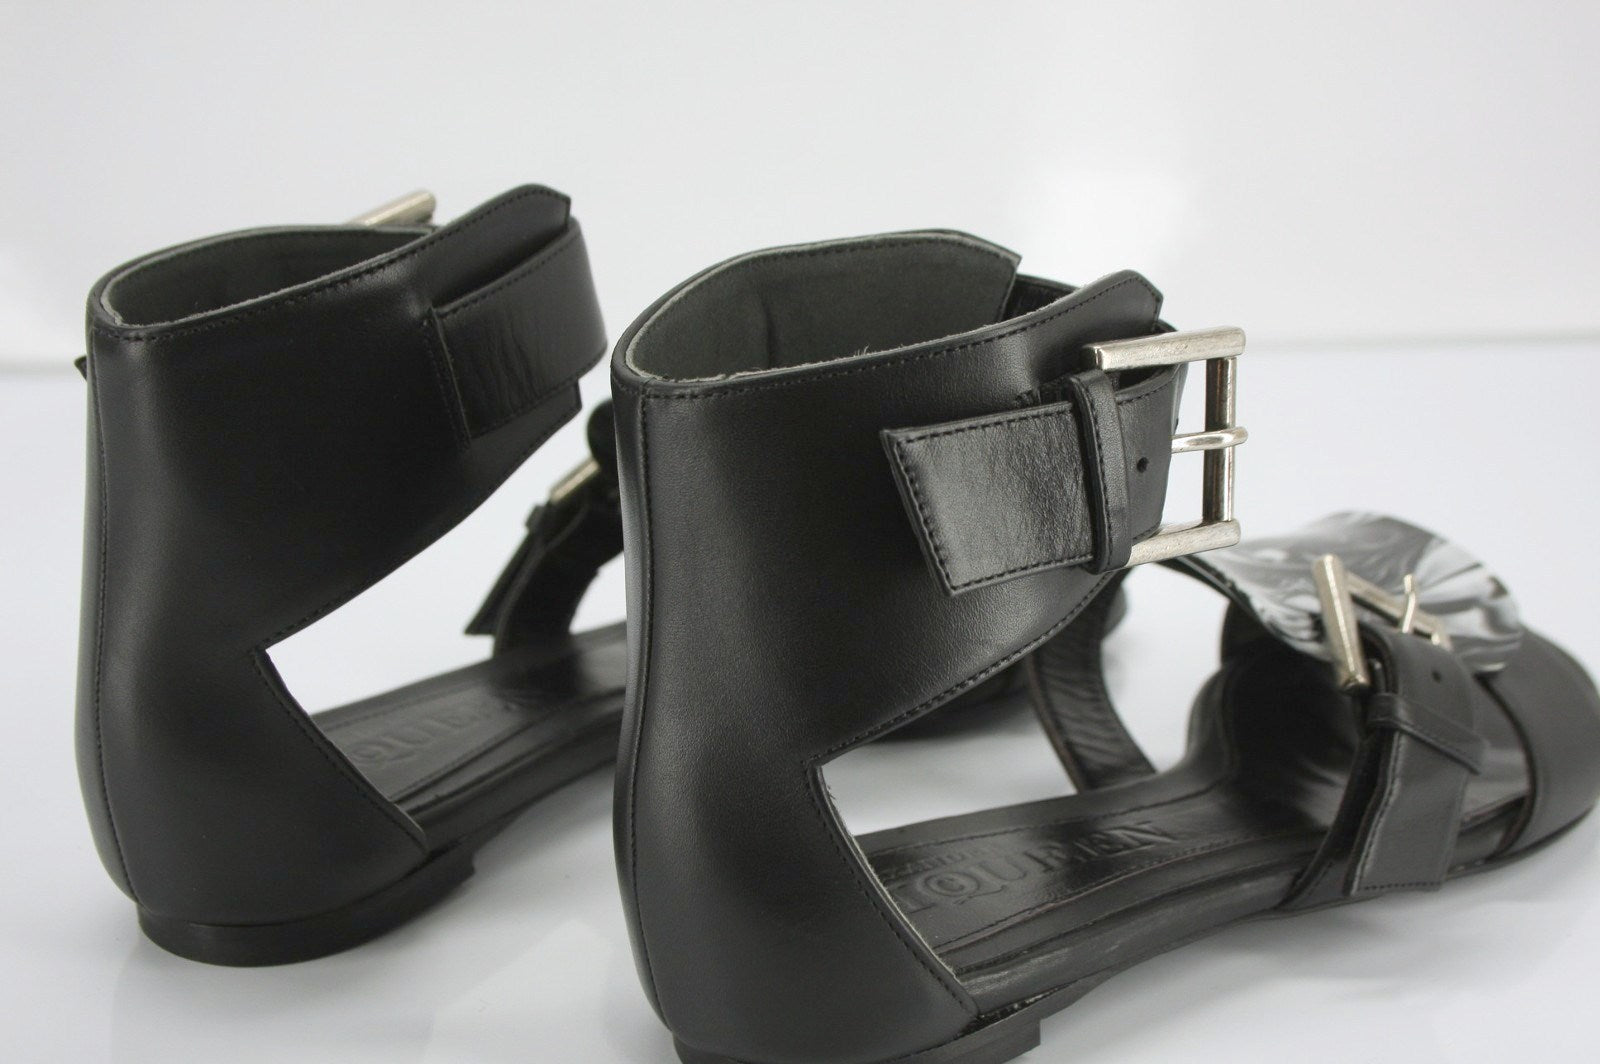 Alexander McQueen Black Leather Flat Ankle Strap Sandals Size 37 Womens New $895